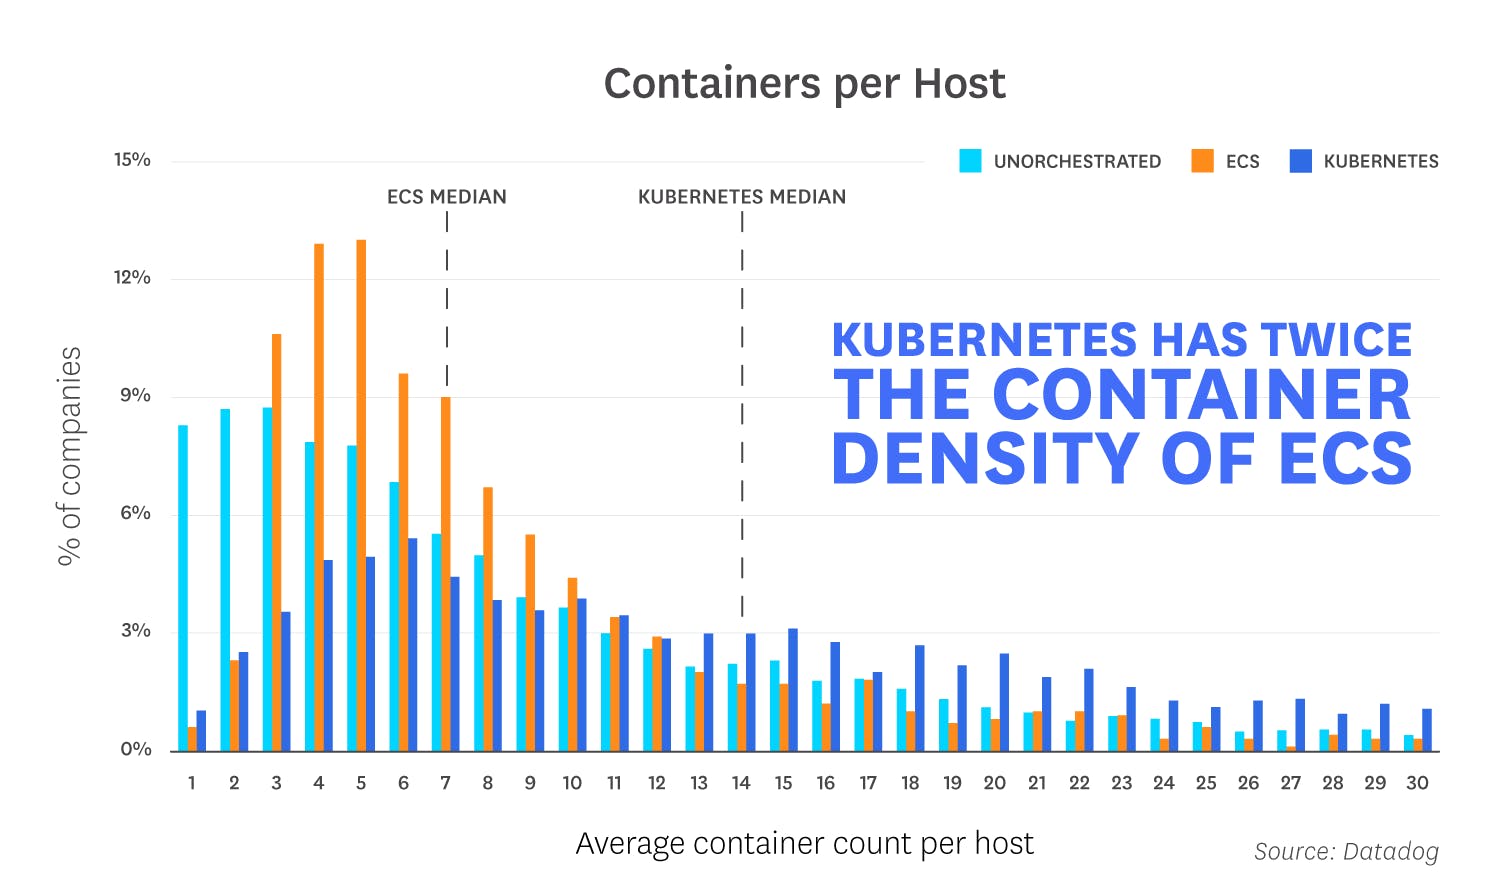 container-report-2018/orchestration-2018-fact-8-v3